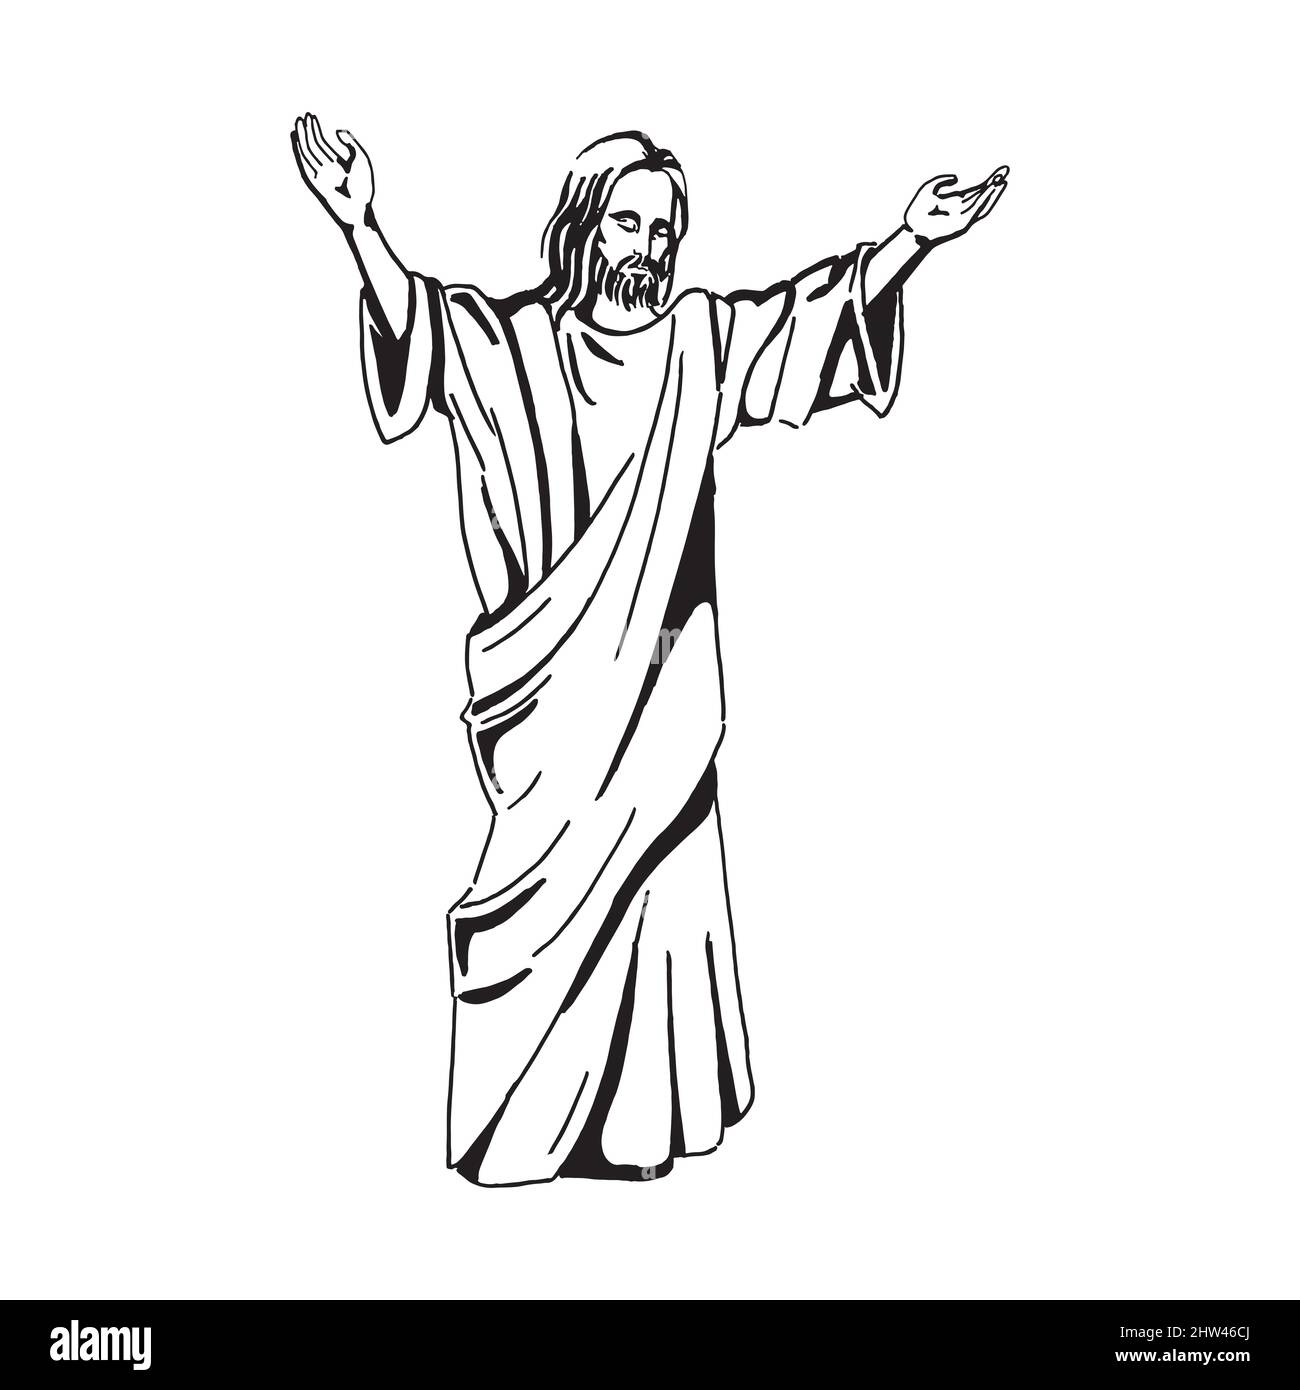 Vector illustration of Jesus Christ, God and bible Stock Vector Image ...